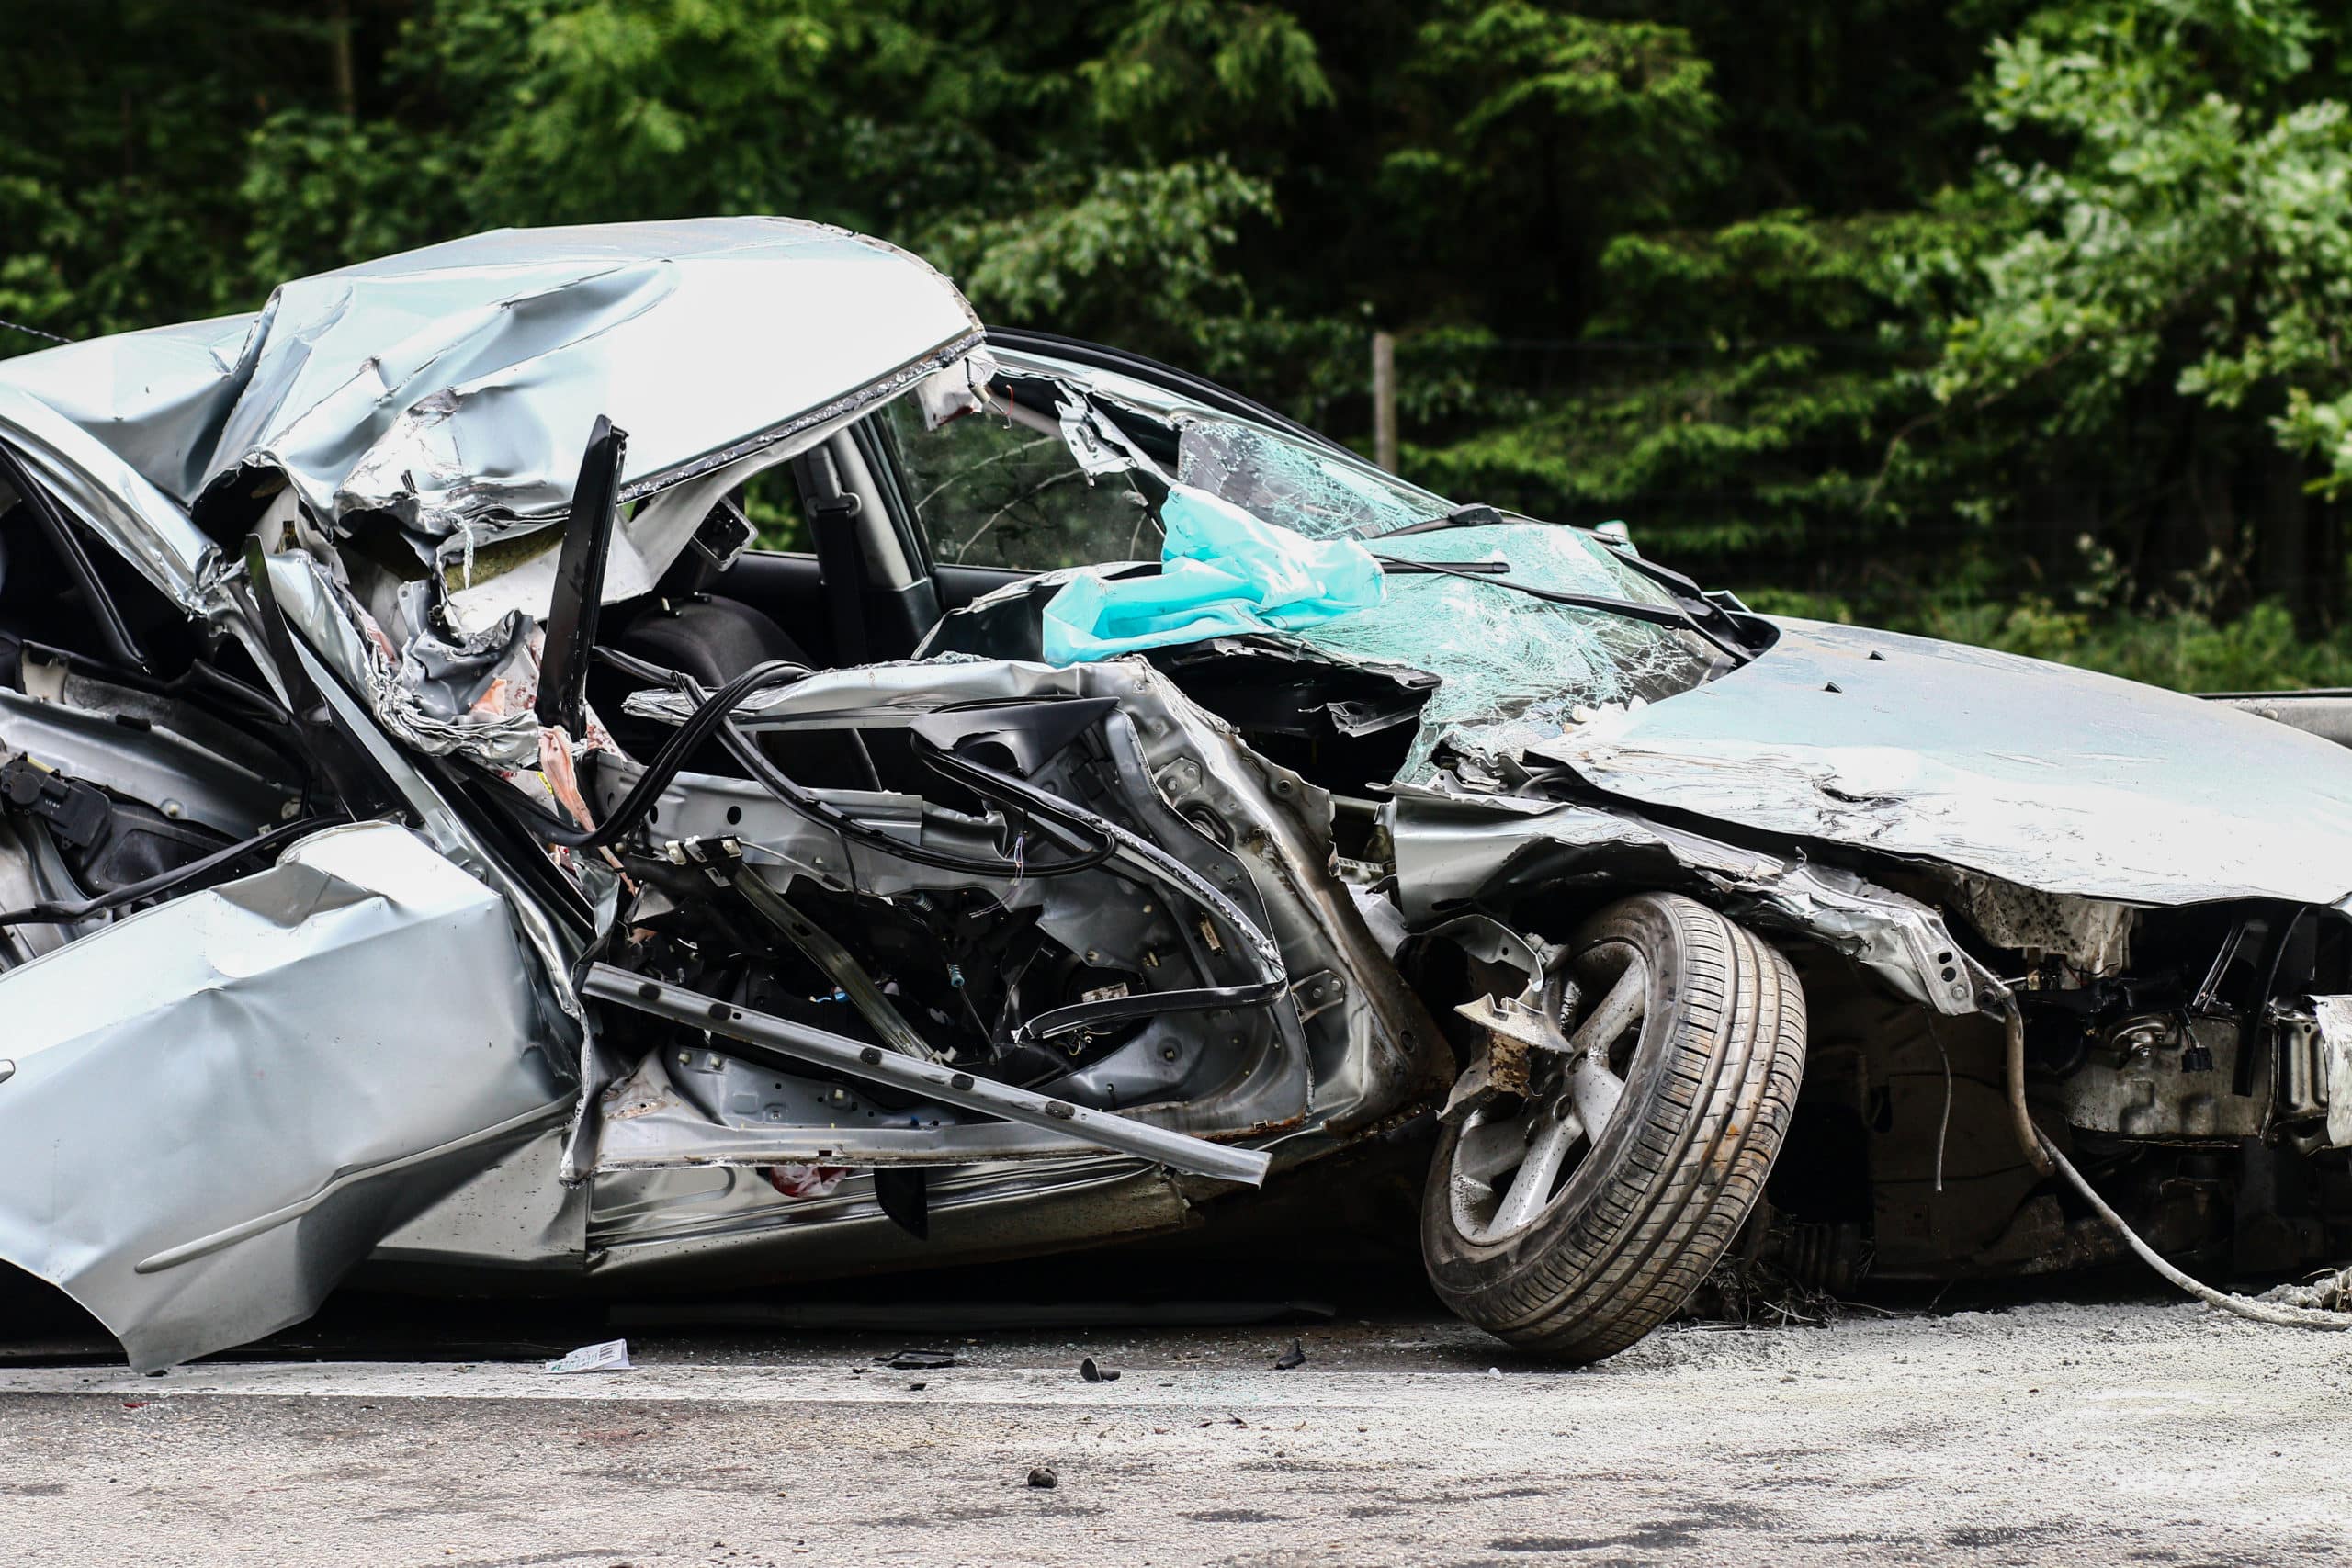 9 Things to Do After a Car Accident